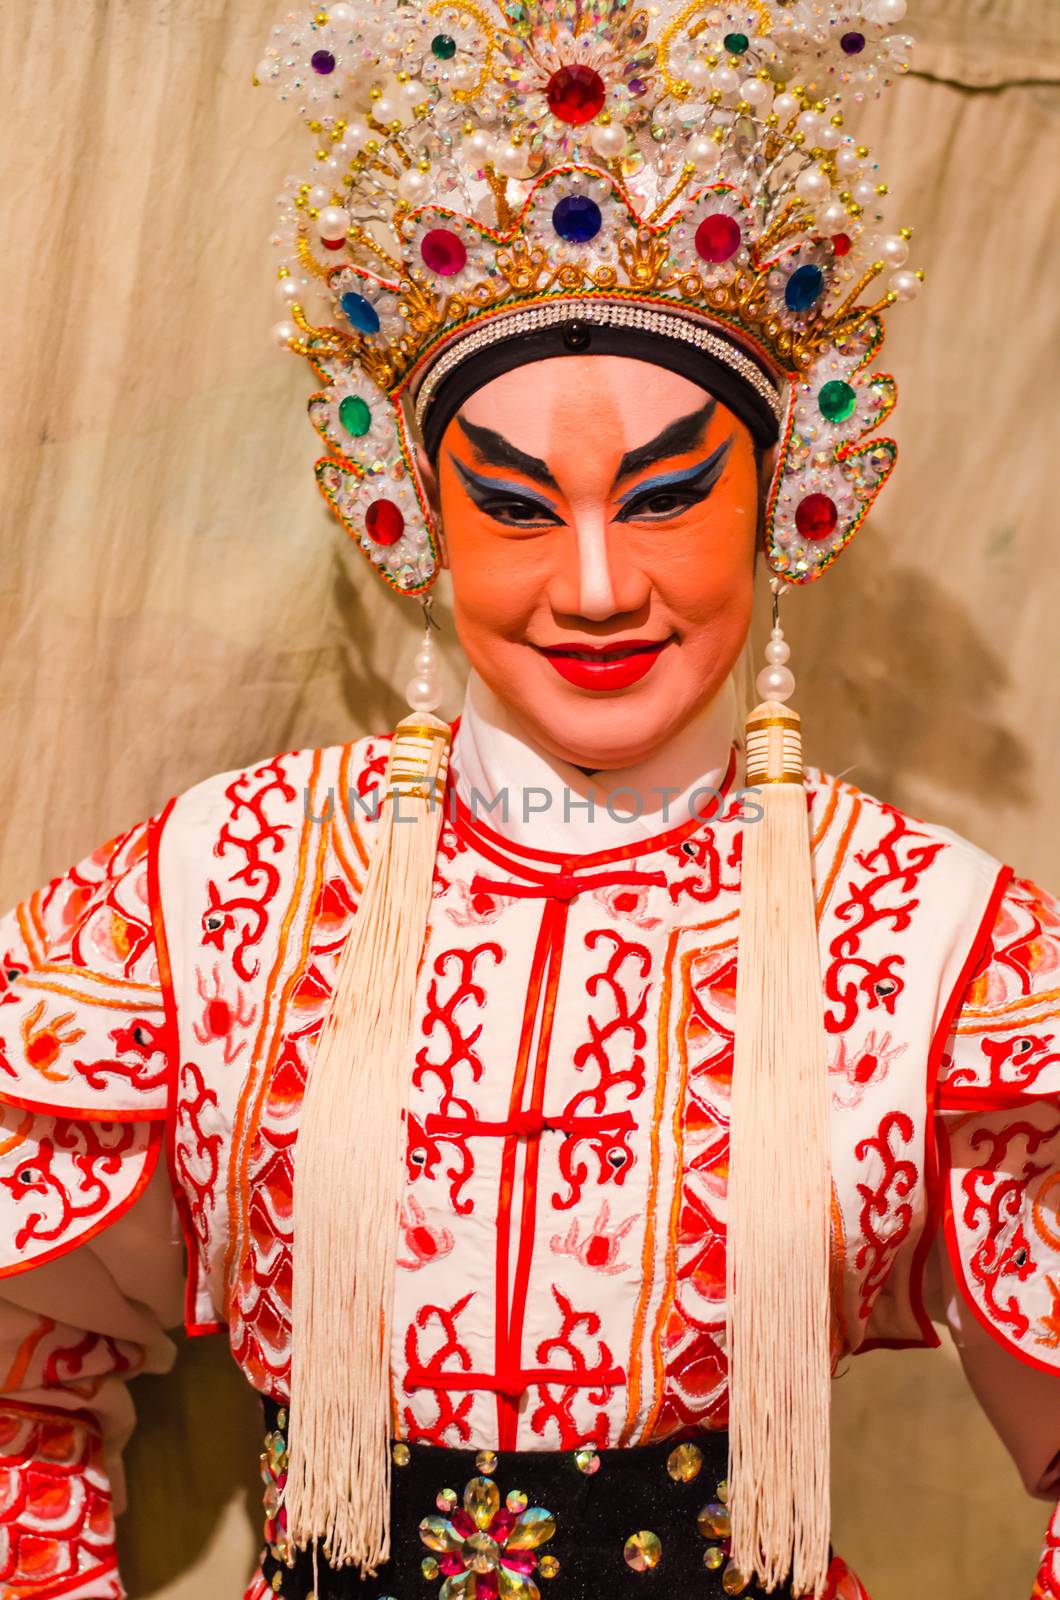 BANGKOK - OCTOBER 22: Unidentified Chinese opera actress at Theaters of Thailand's ethnic Chinese in Chinatown on October 27, 2014 in Bangkok, Thailand.